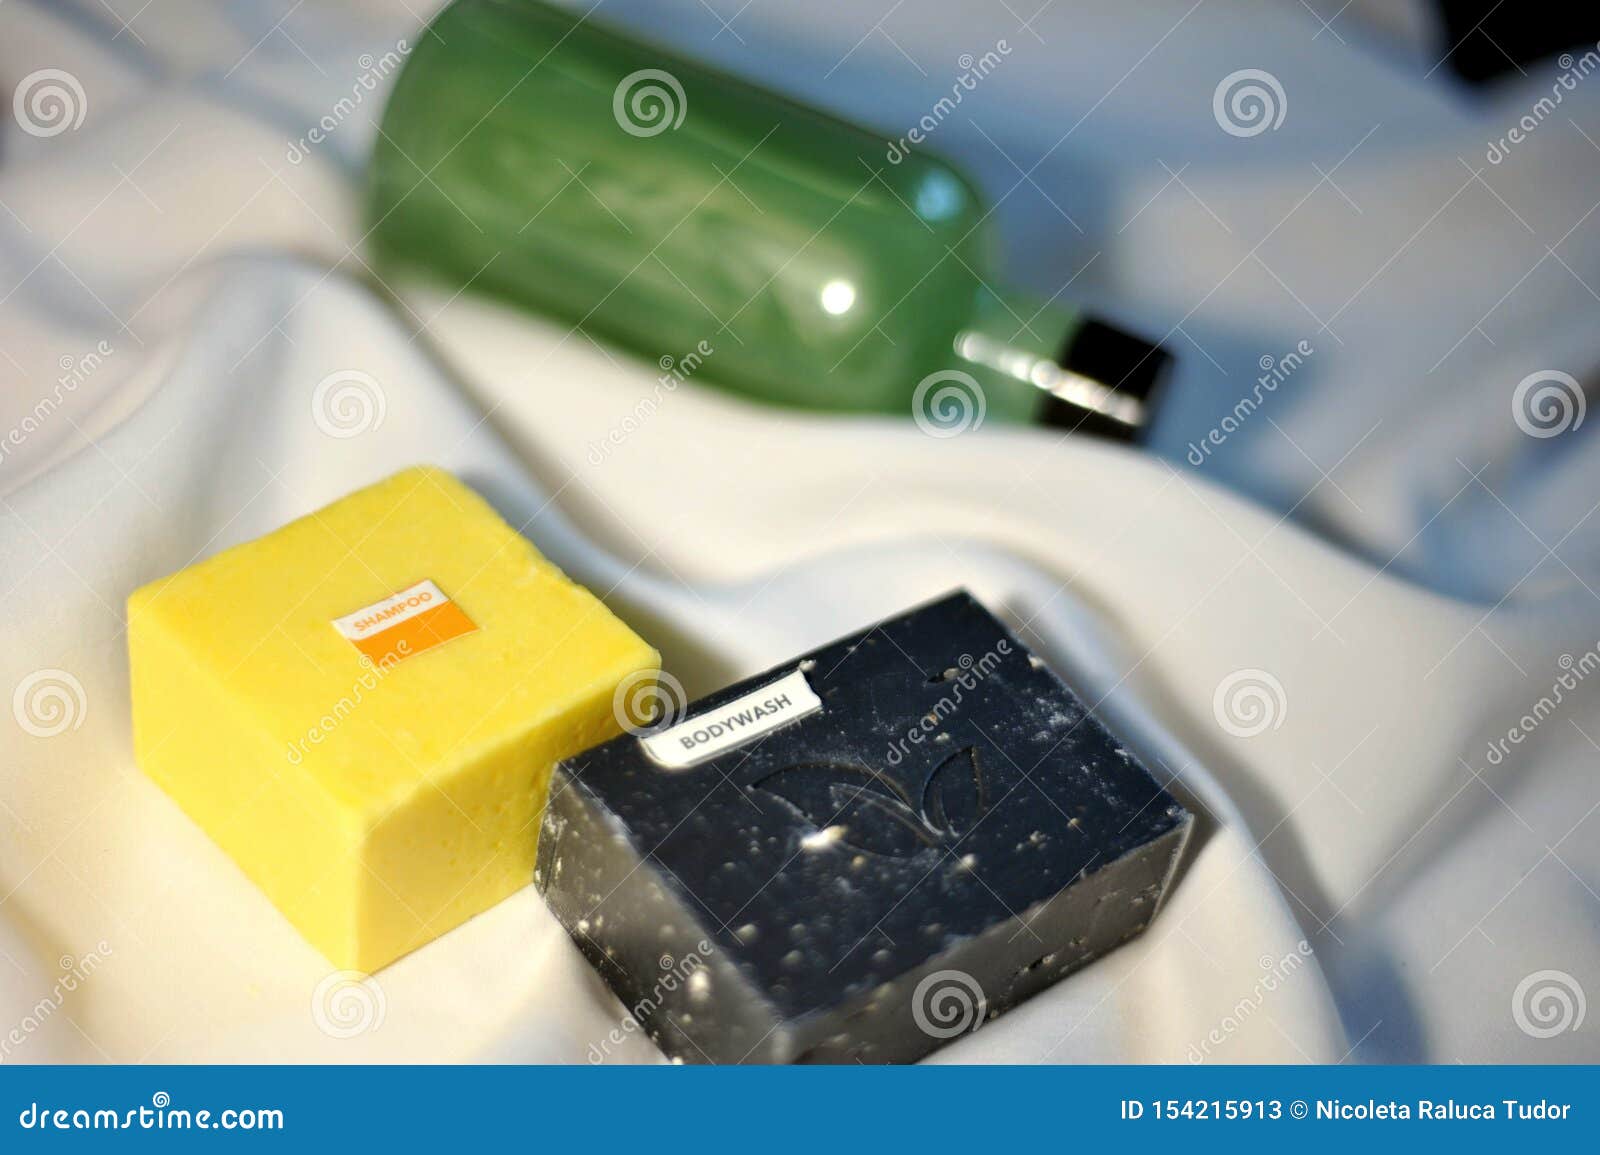 solid shampoo and bathwash to save bottles of plastic that pollute our environment